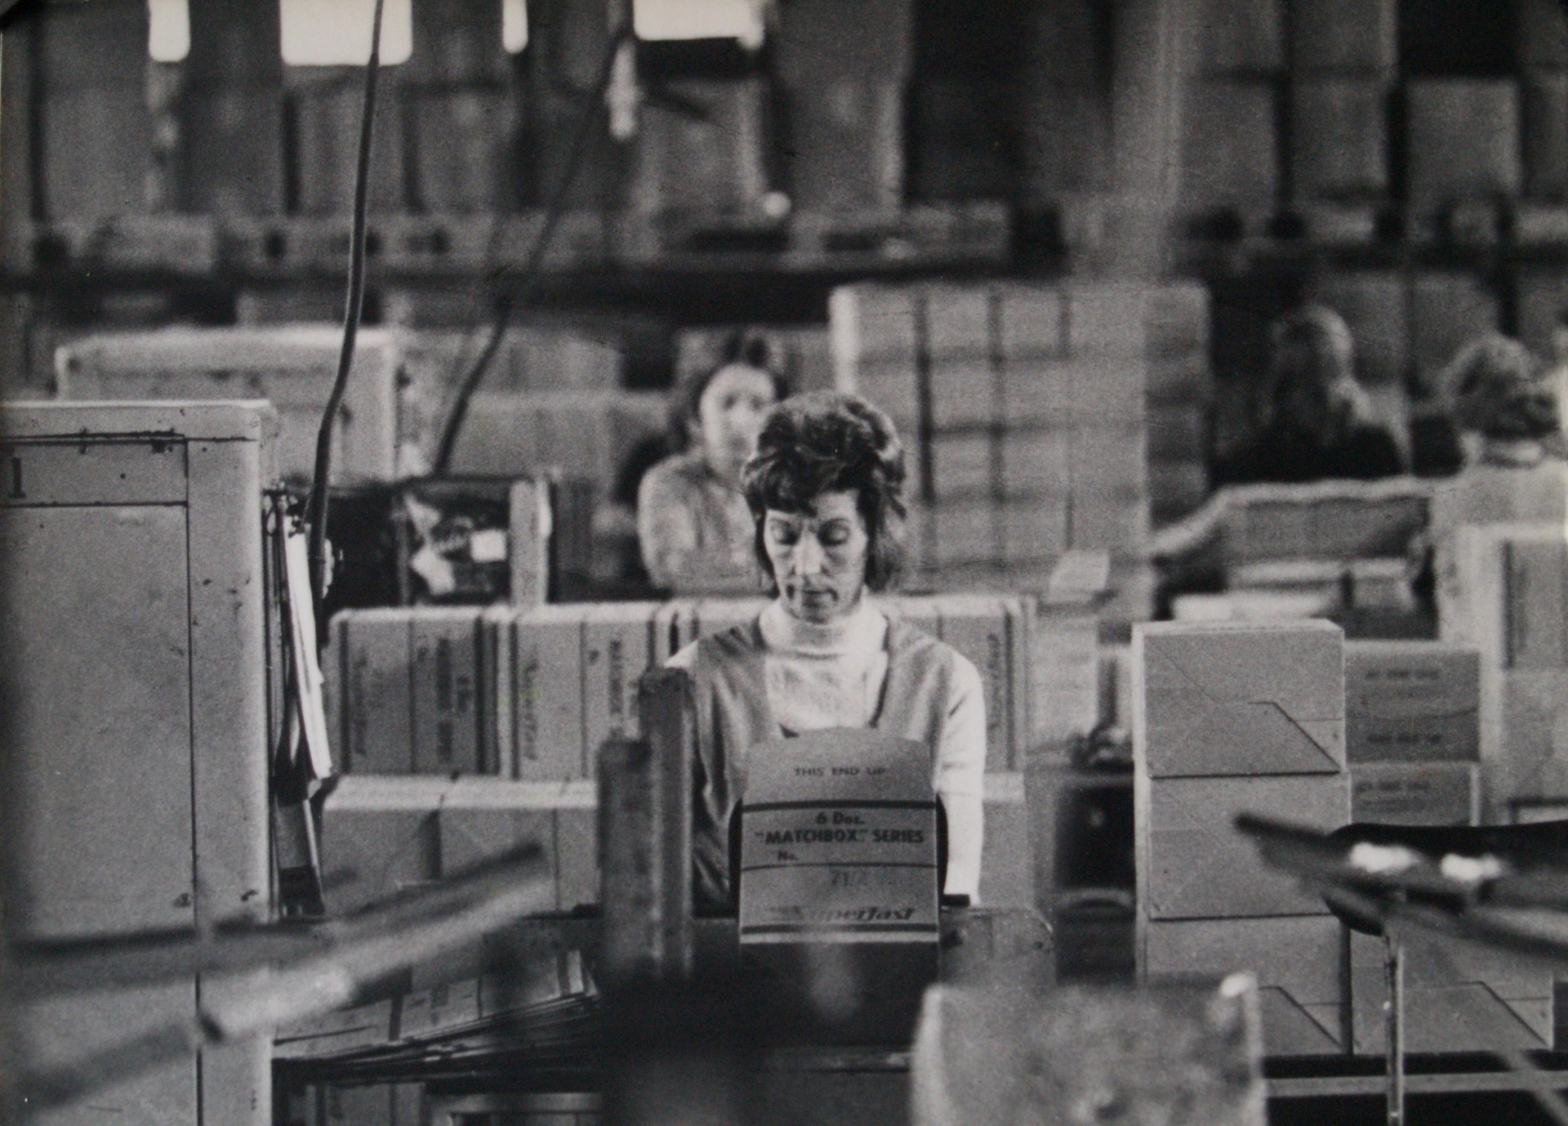 Image from ‘Women and Work’ 1975 ©Hackney Flashers. A black and white photo of a busy factory scene. Many boxes are piled up in front of and along with machinery surround women seated at tables looking down focussed on their work. One woman in the foreground and centre is the focus of the image, her concentration is clear from her expression.